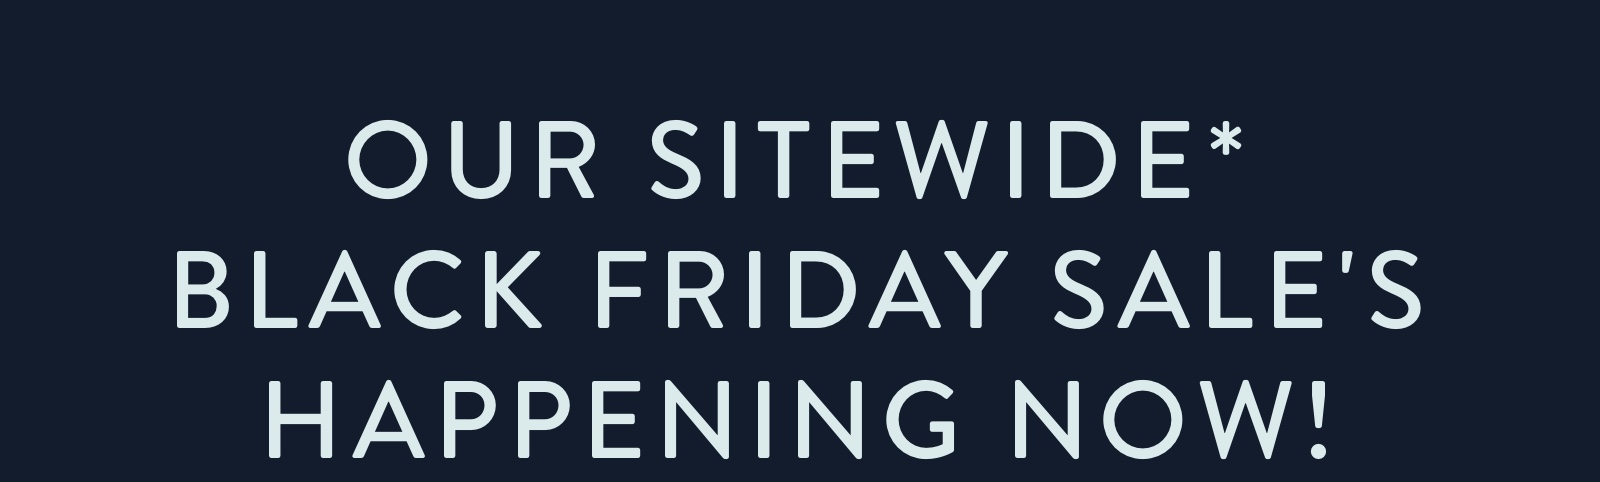 Our Sitewide* Black Friday Sale''s Happening Now!